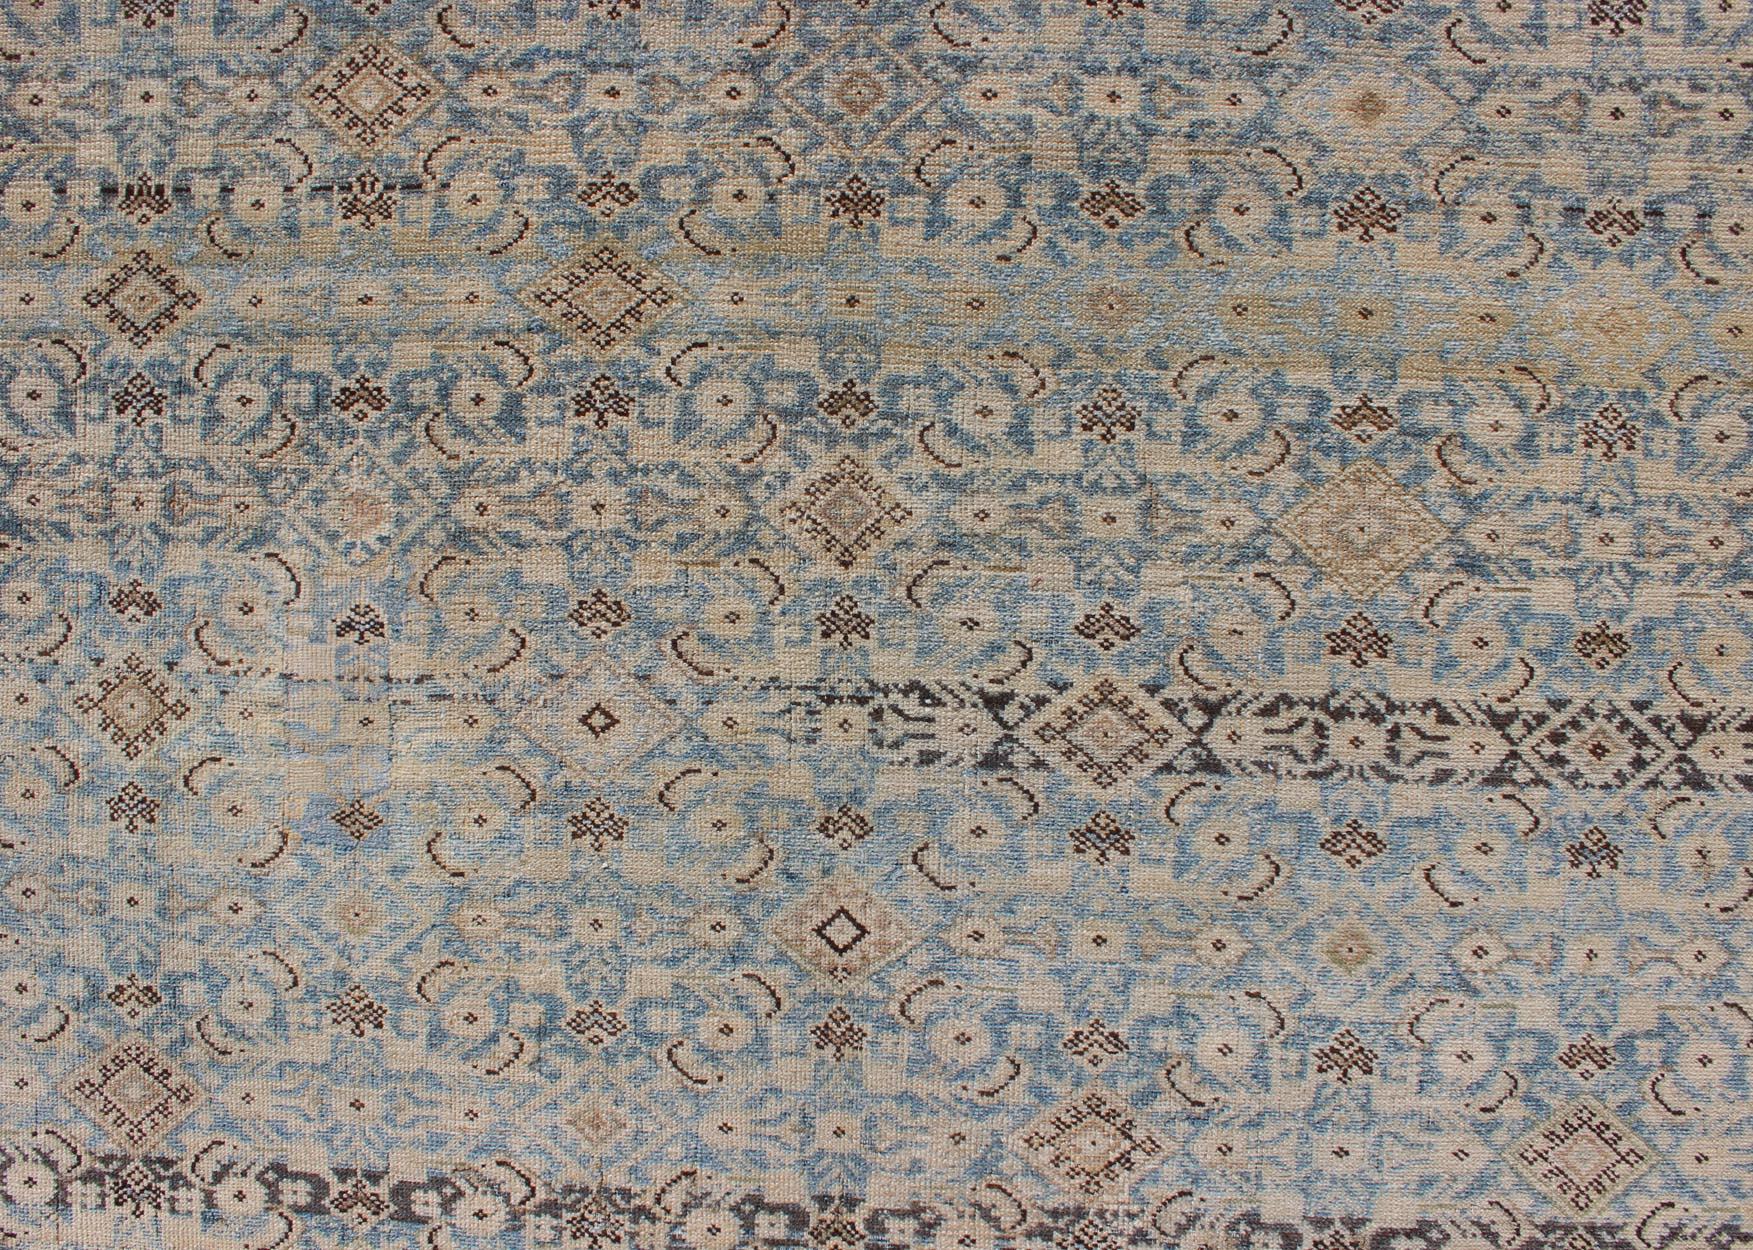 Muted Light Blue Persian Gallery Malayer Rug with Sub-Geometric Design 1